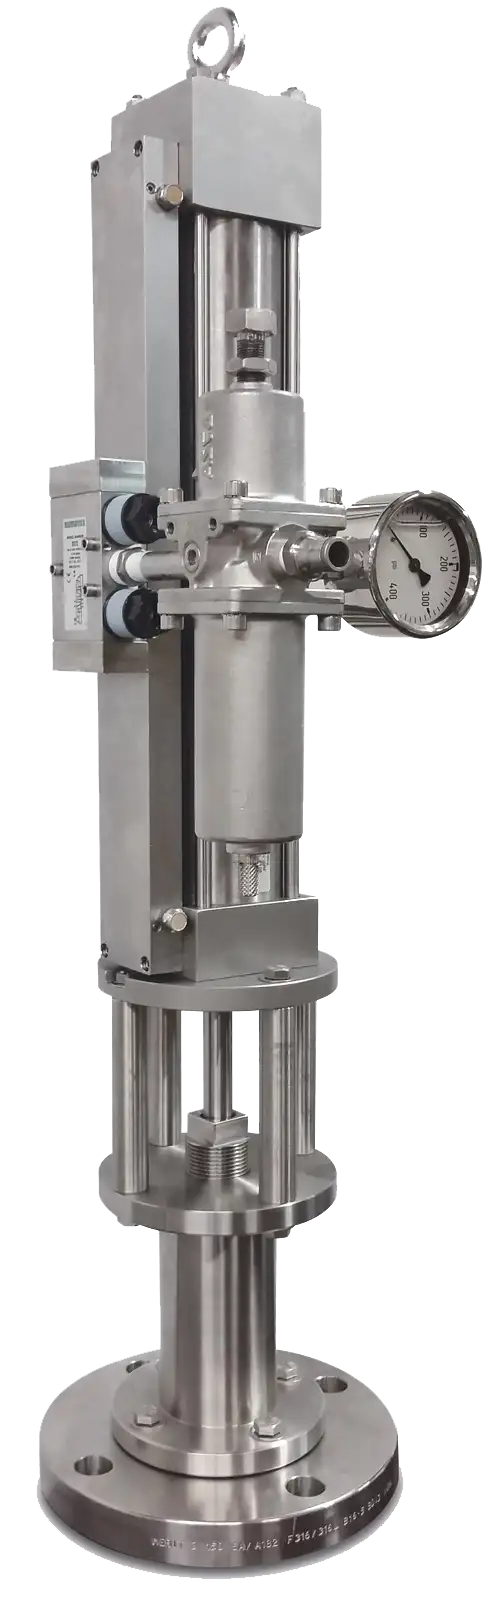 A tall, industrial-grade stainless steel valve actuator with an integrated pressure gauge. Precision-engineered with multiple chambers, bolts, and connections, it also incorporates a top-head drive pump, making it ideal for regulating fluid or gas flow in high-pressure environments.